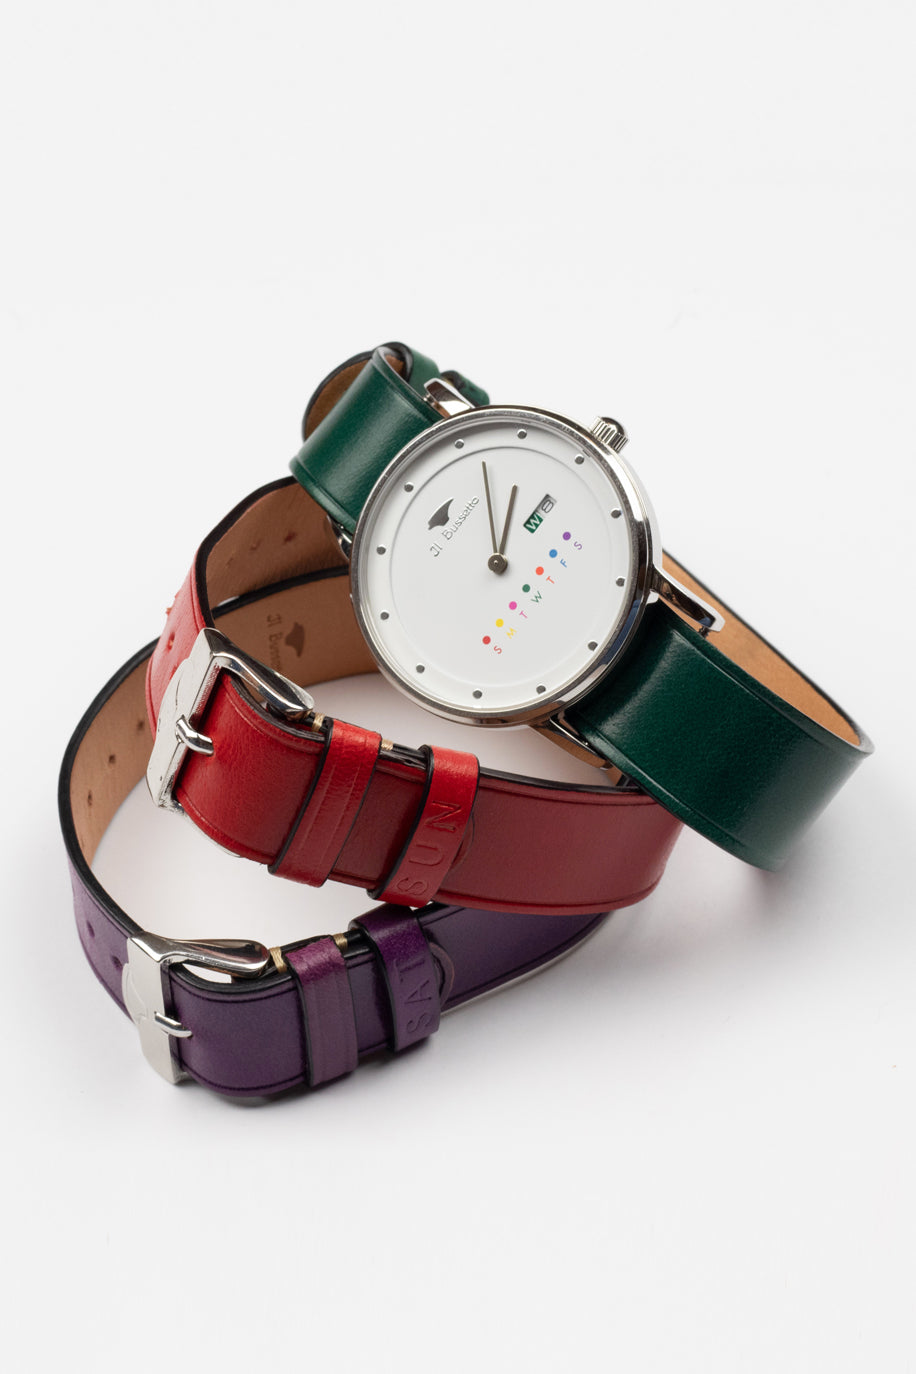 Watch + 3 Leather Watchstraps